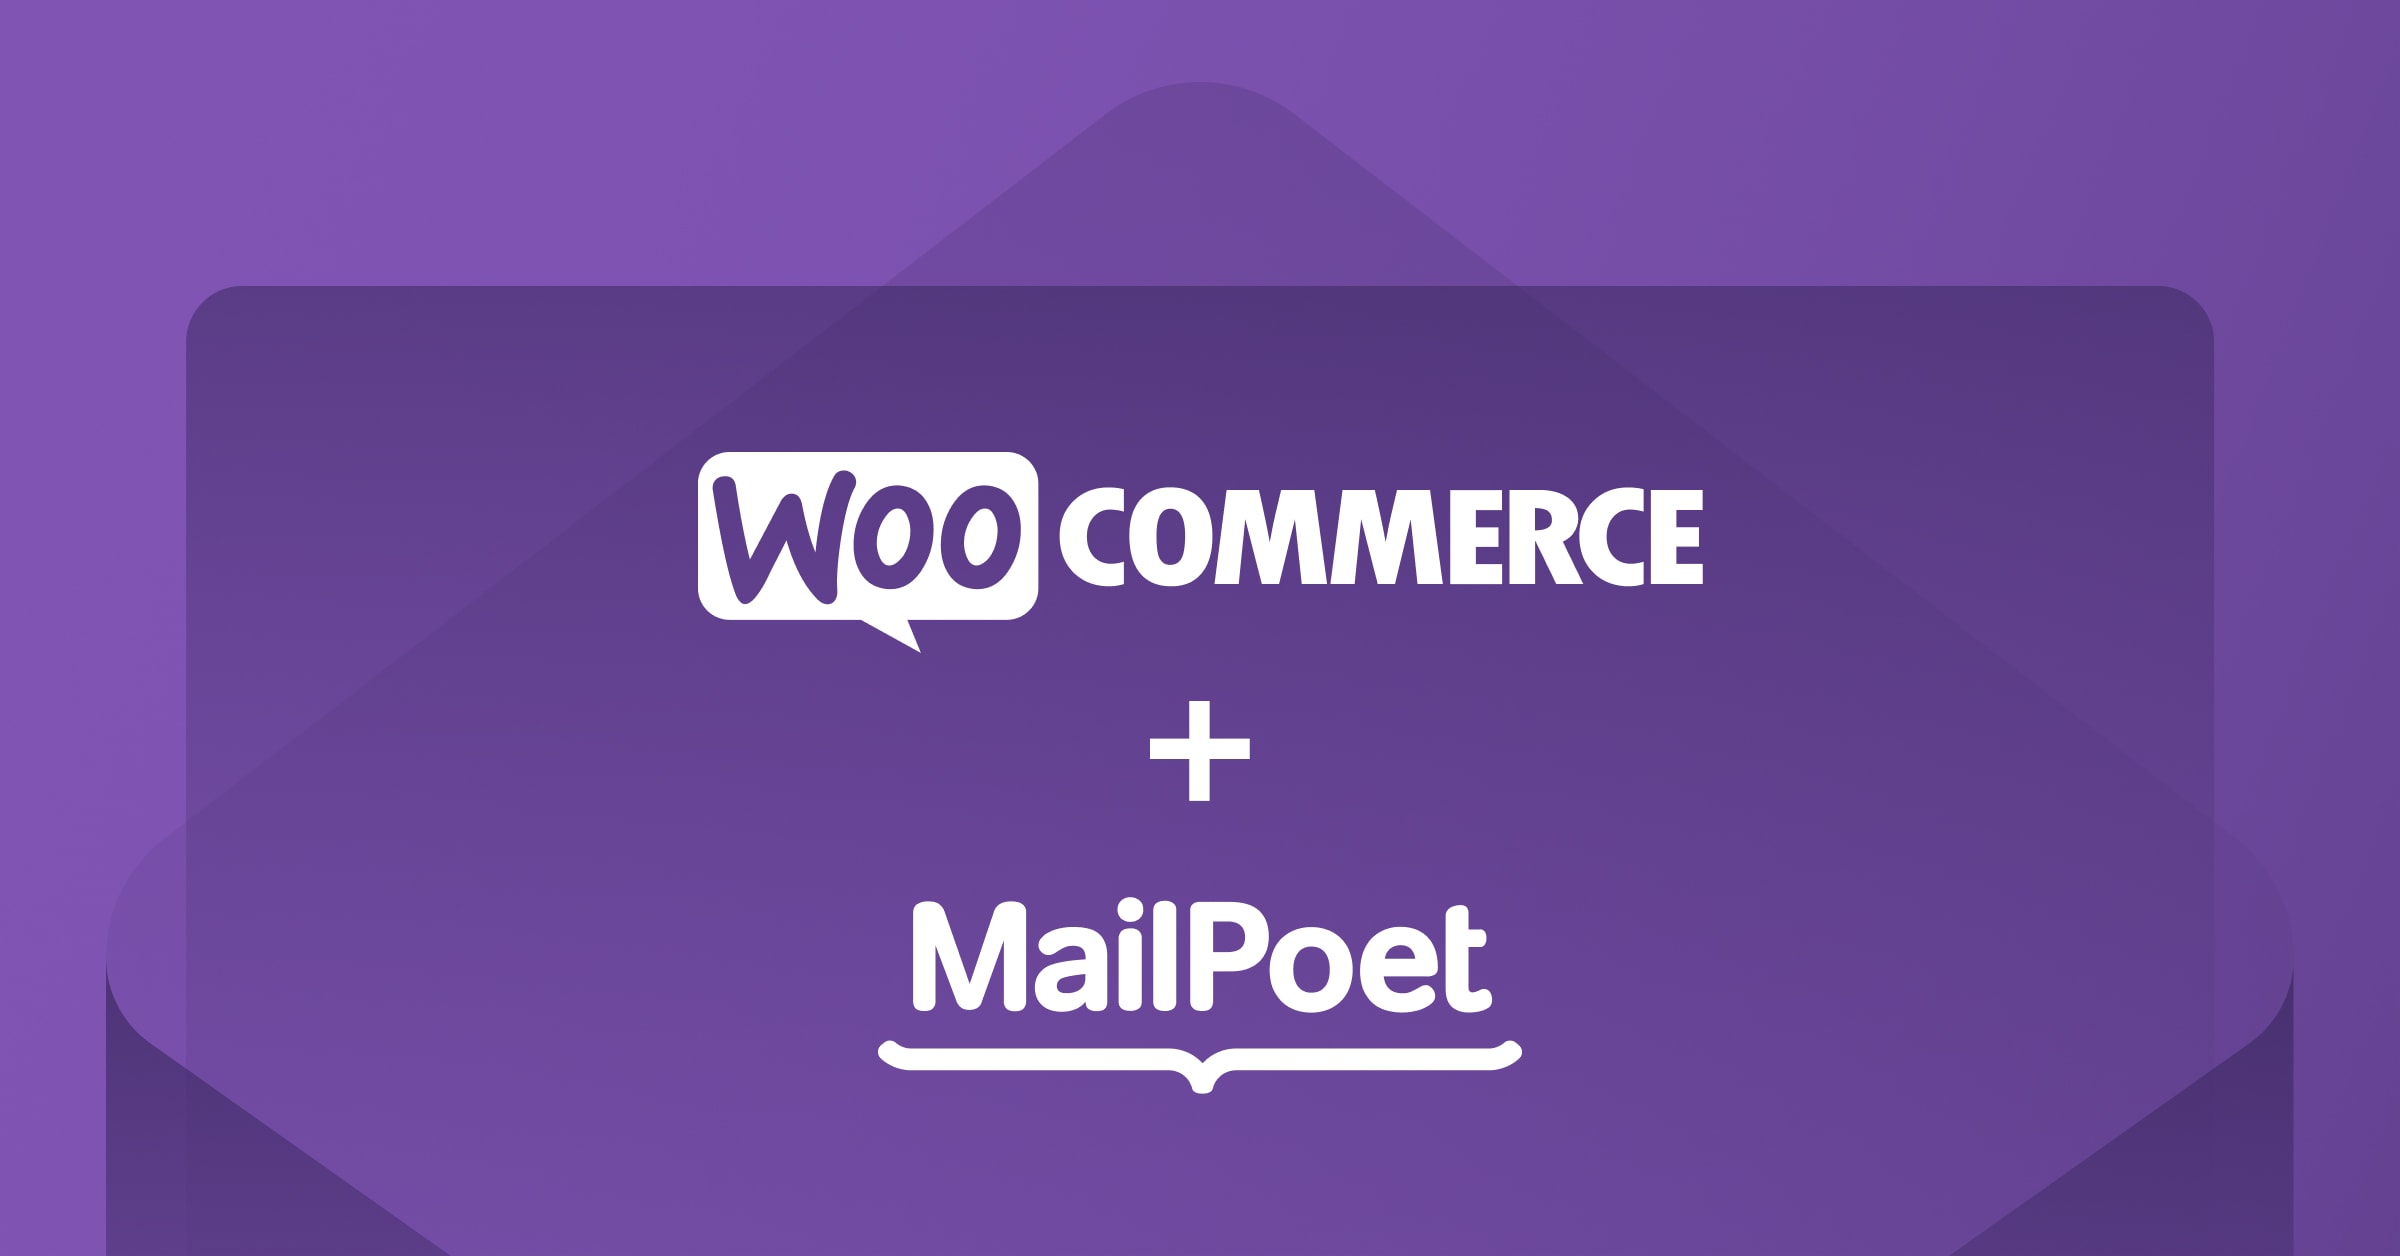 WooCommerce and MailPoet logos on a purple background